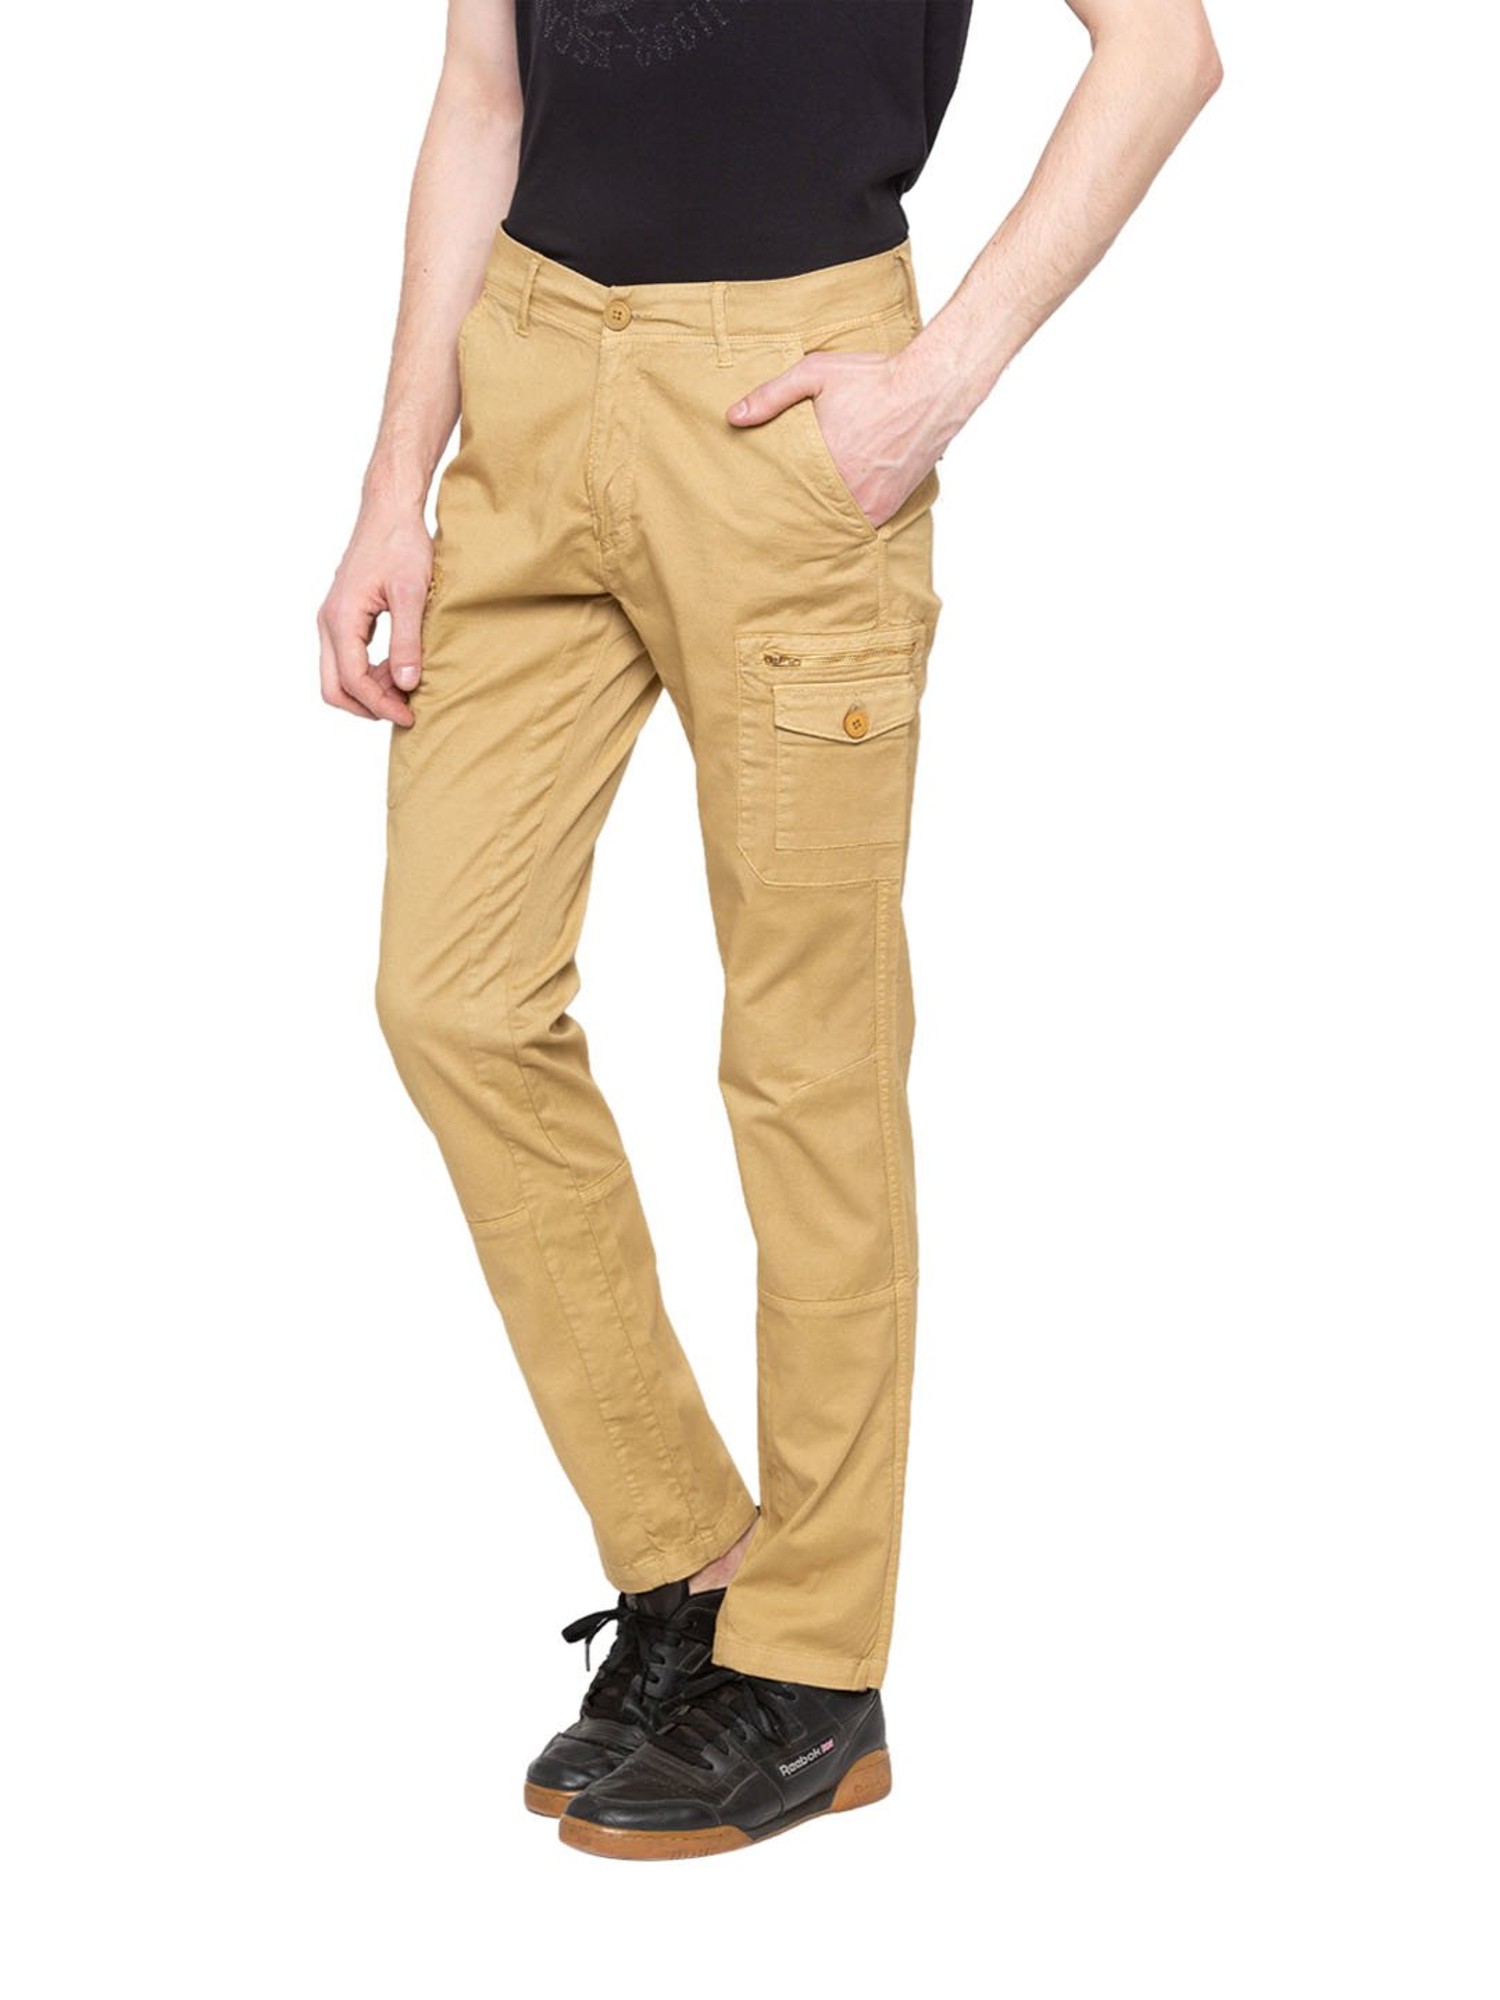 Buy SPYKAR Trousers online  160 products  FASHIOLAin